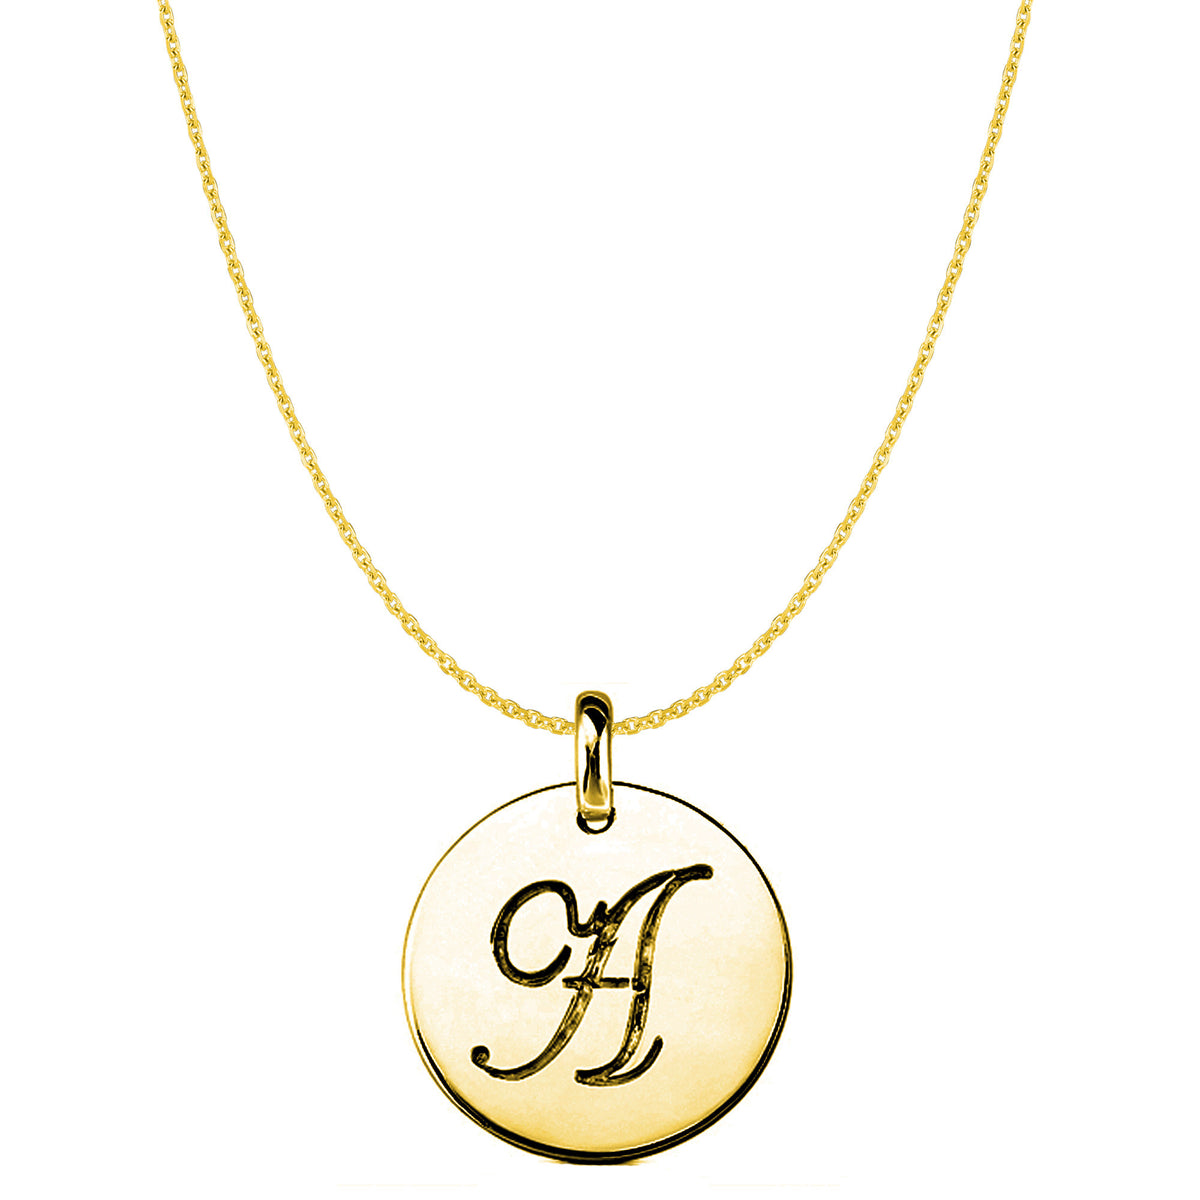 "A" 14K Yellow Gold Script Engraved Initial Disk Pendant fine designer jewelry for men and women